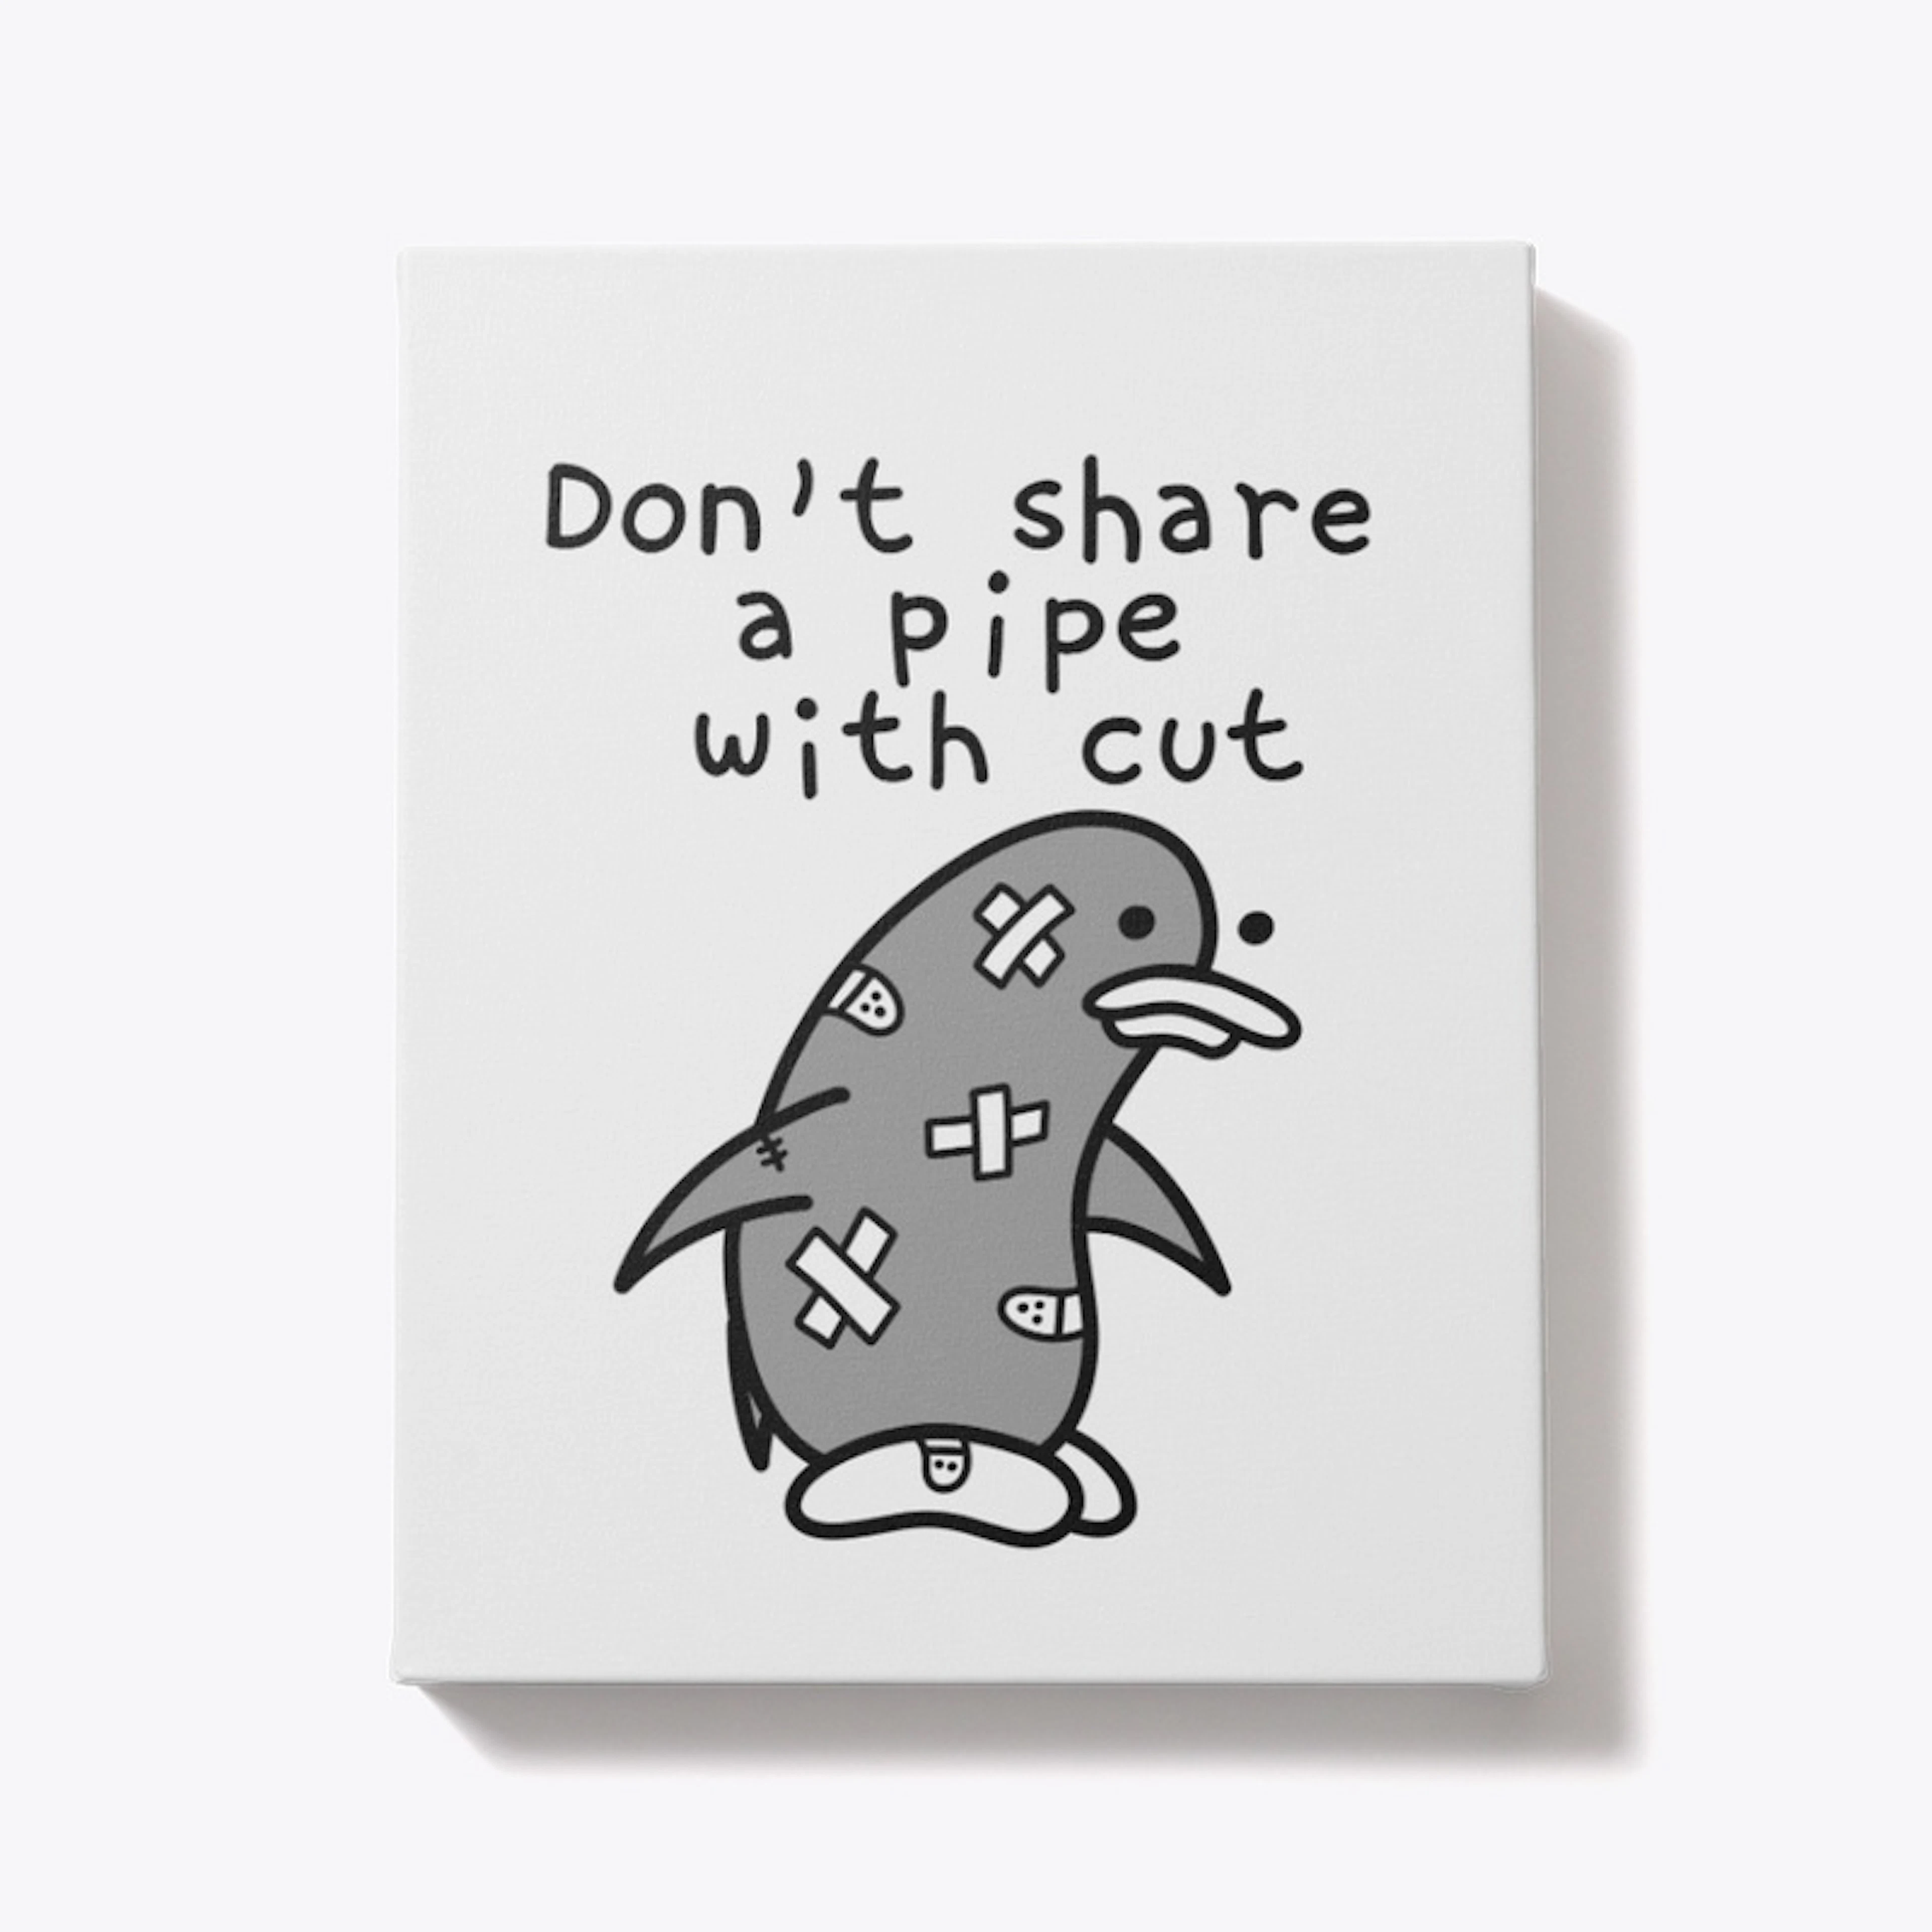 Don't share a pipe with cut